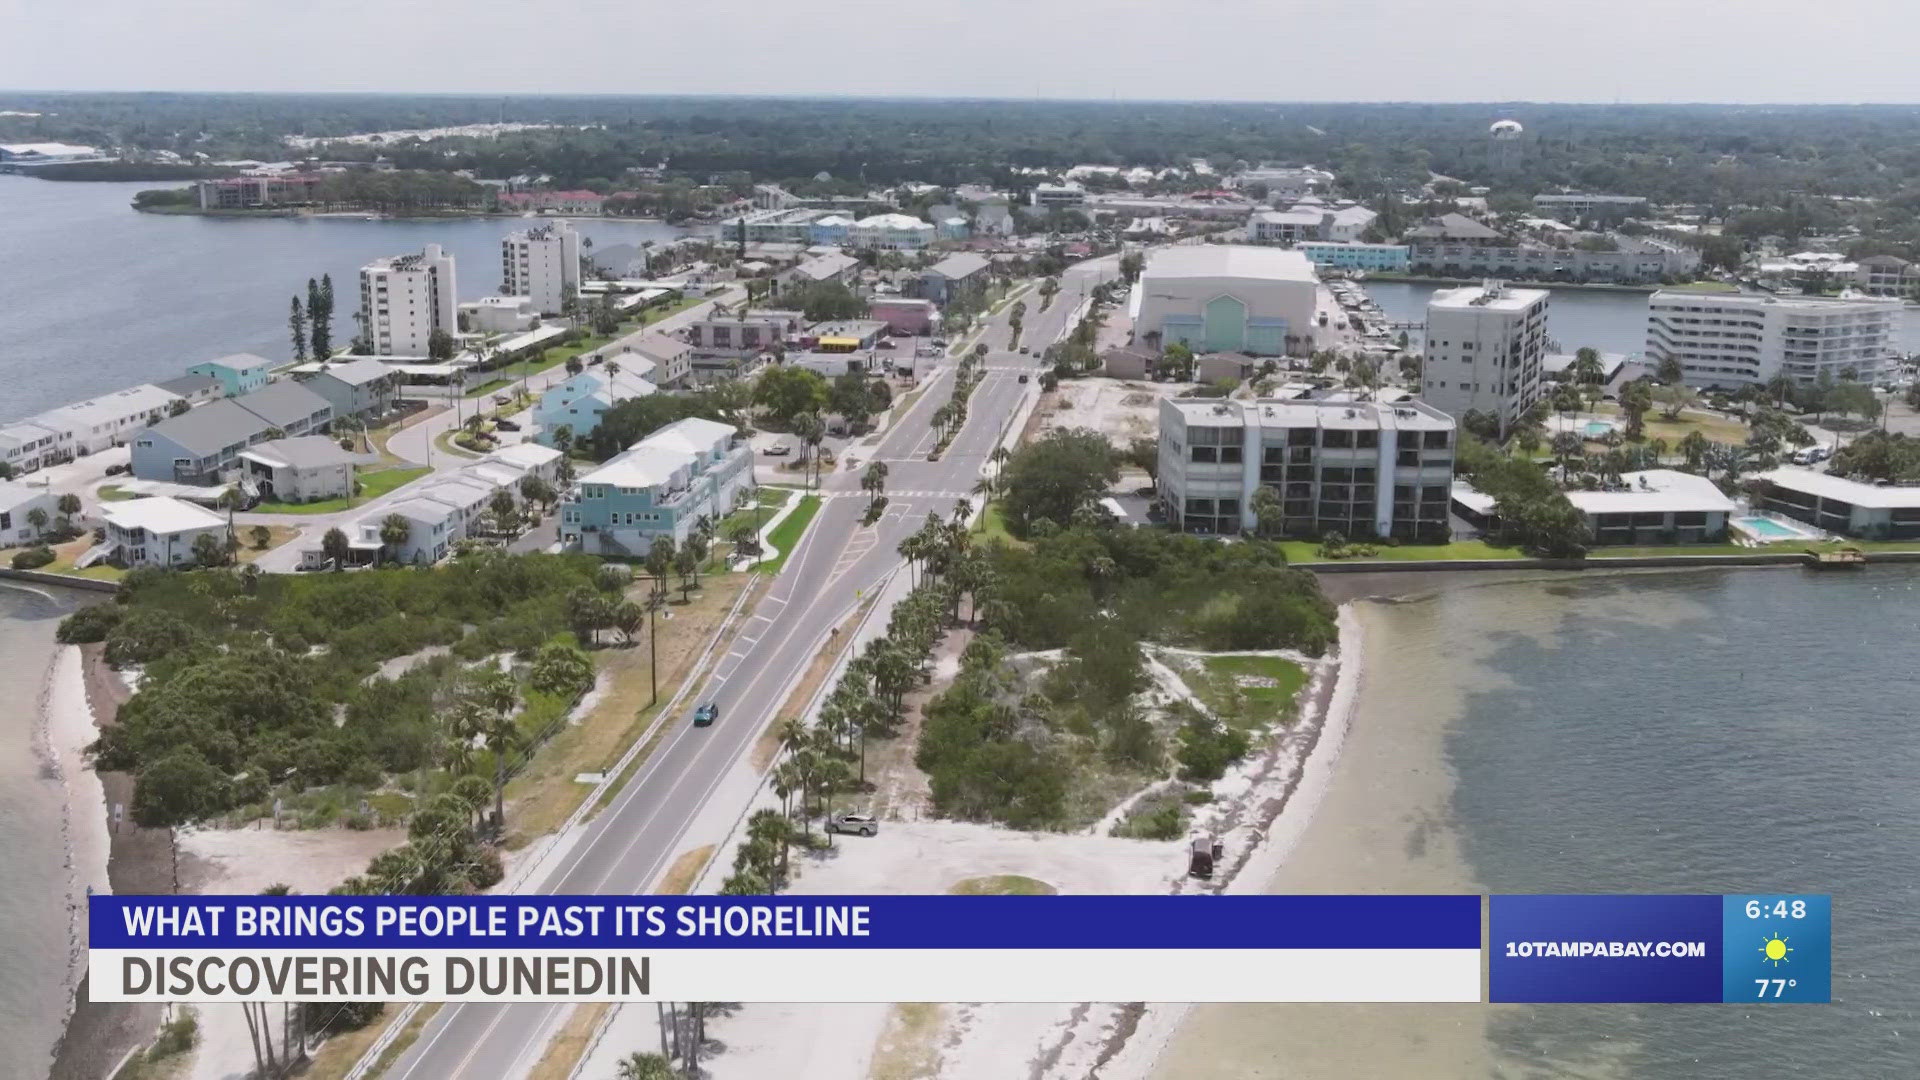 Known for its famous beaches like Honeymoon and Caladesi Islands, Dunedin in Pinellas County is a tourist hotspot.